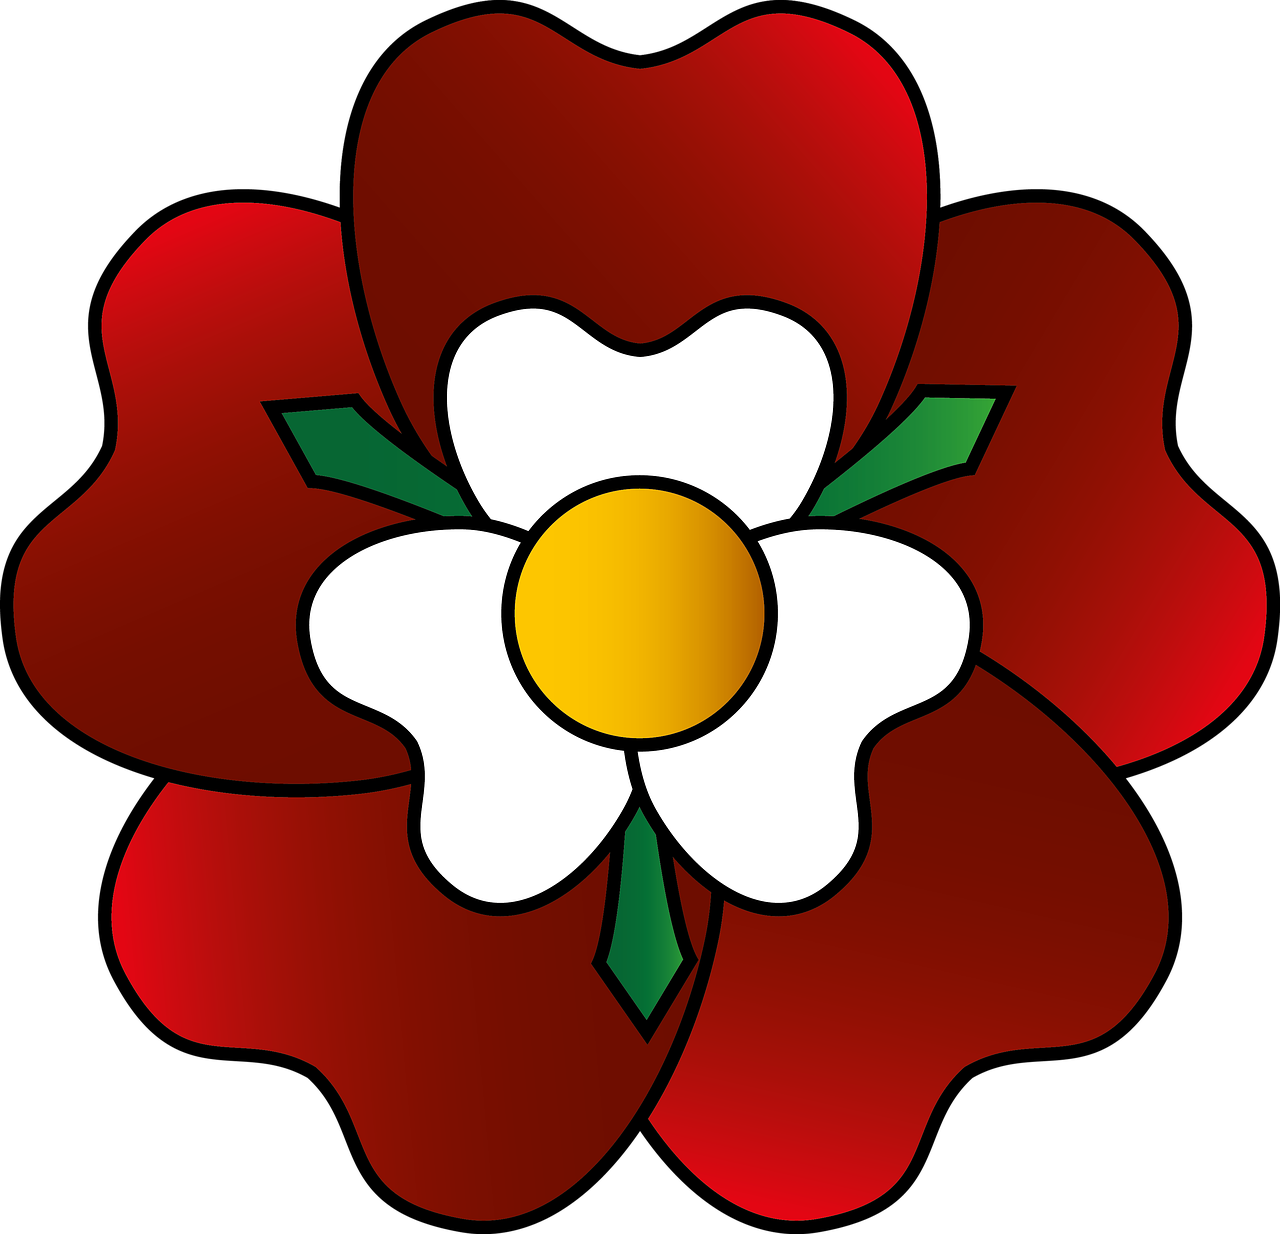 A Red And White Flower With A Yellow Center